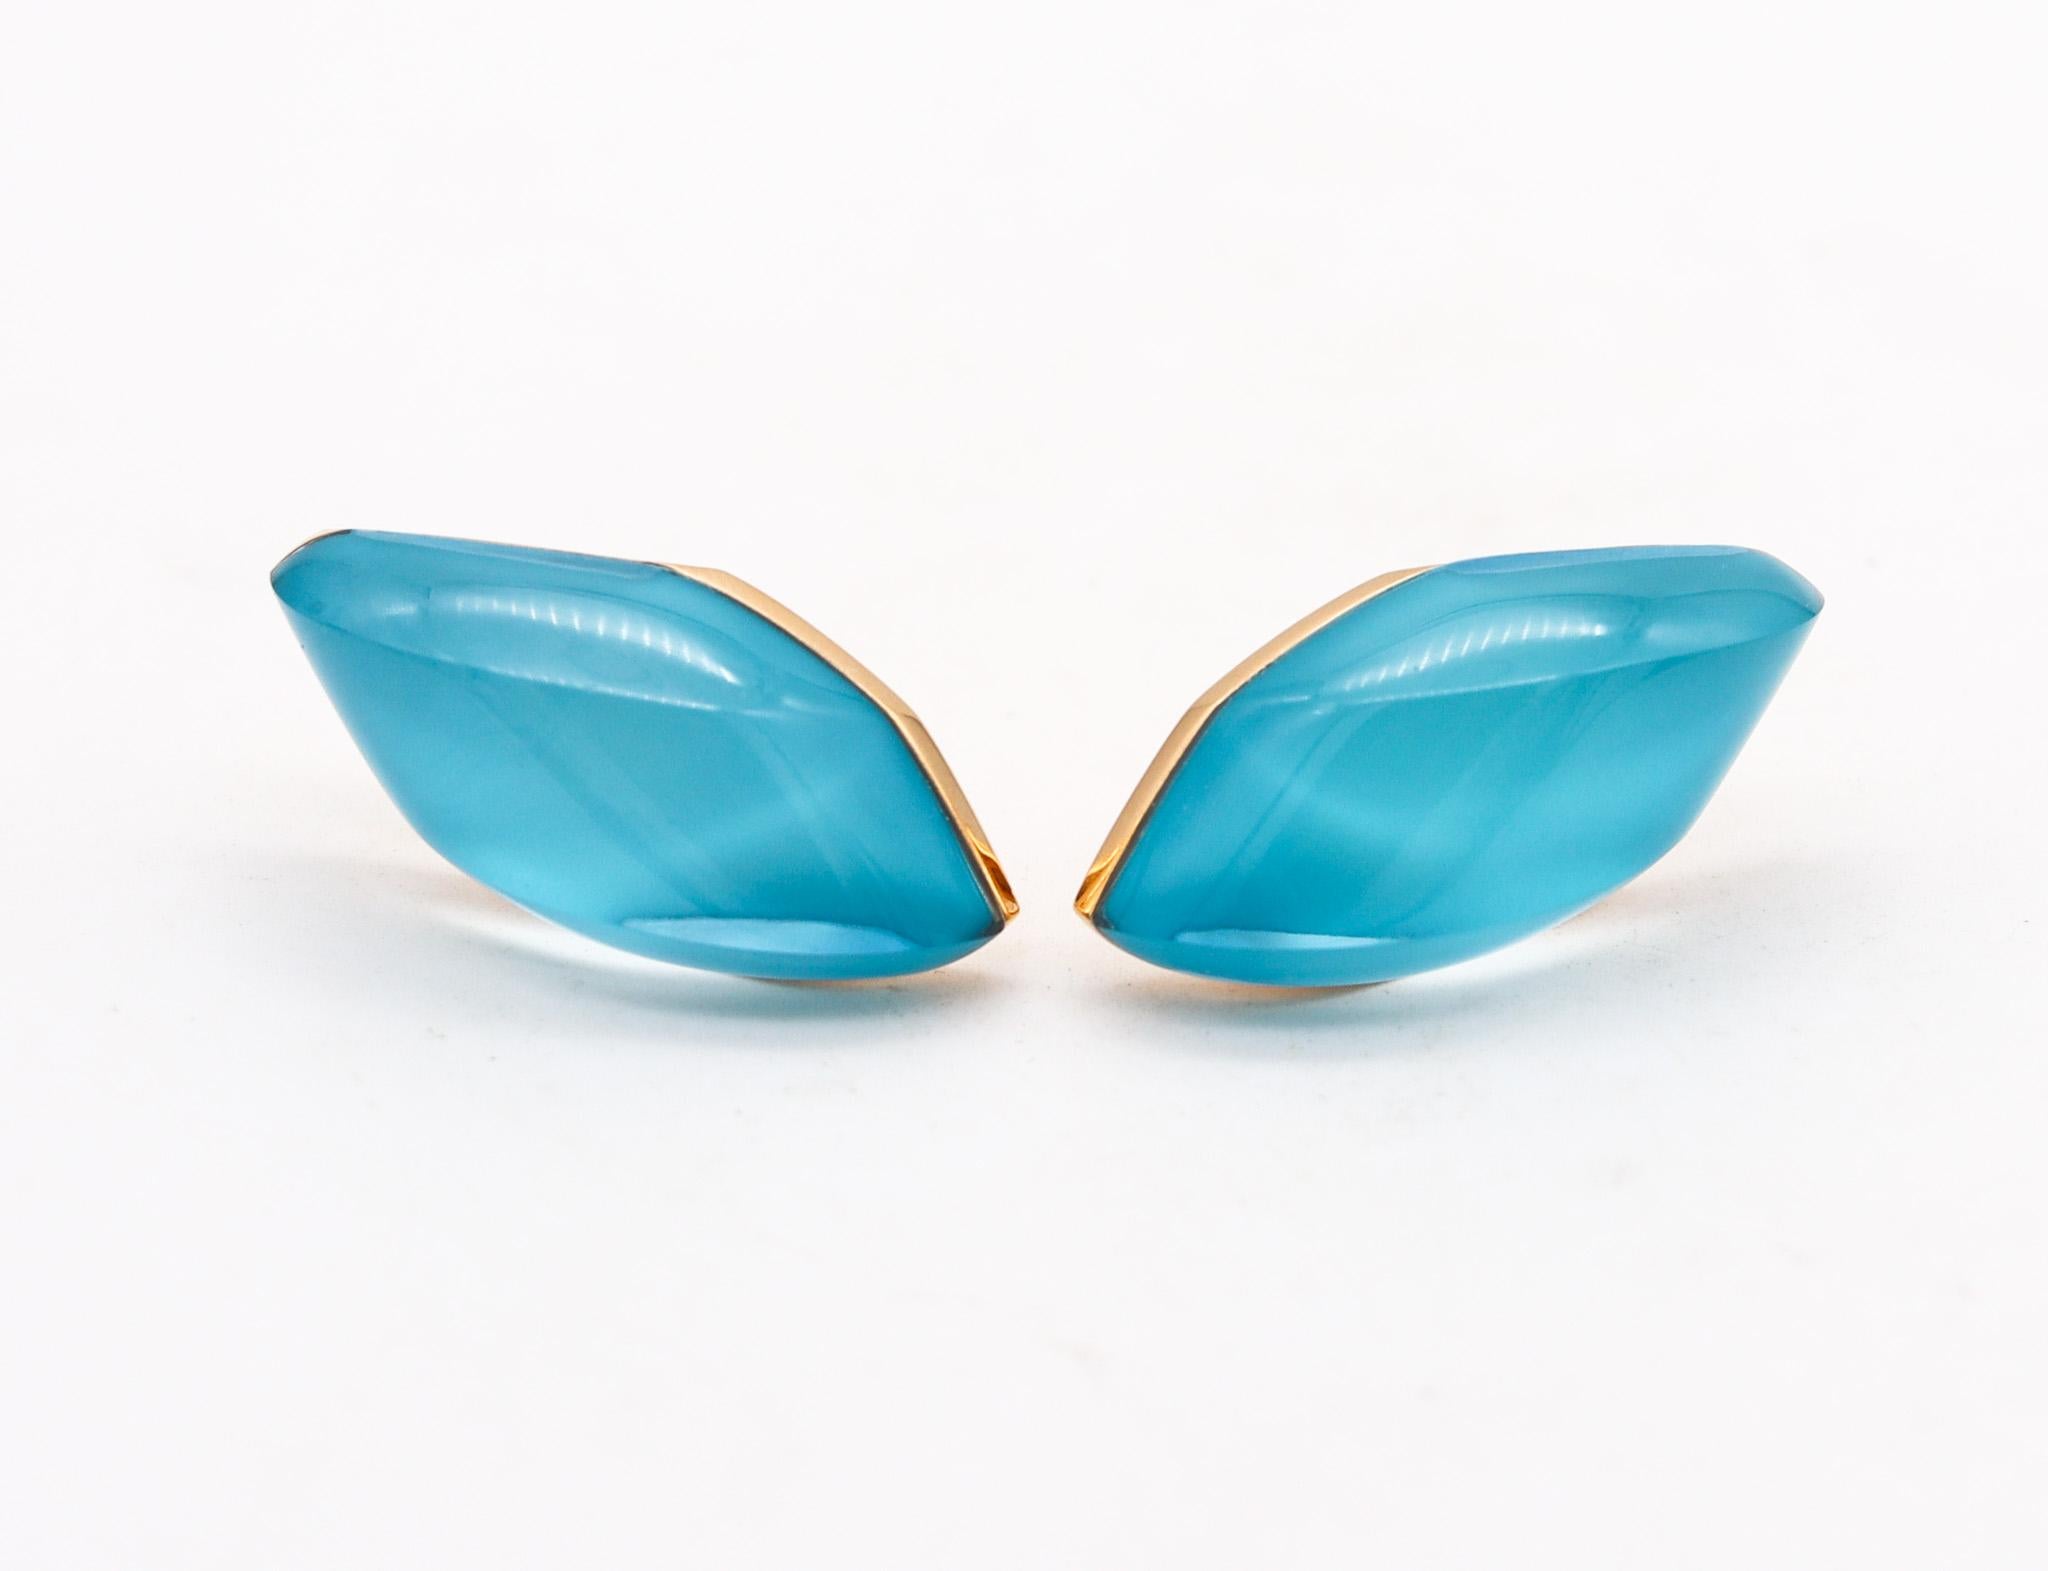 Aladino clip-on earrings designed by Vhernier.

Beautiful pair of earrings from the Aladino collection, created with masterful design in Milano Italy by the exclusive jewelry house of Vhernier. This sculptural piece was carefully crafted with a bold